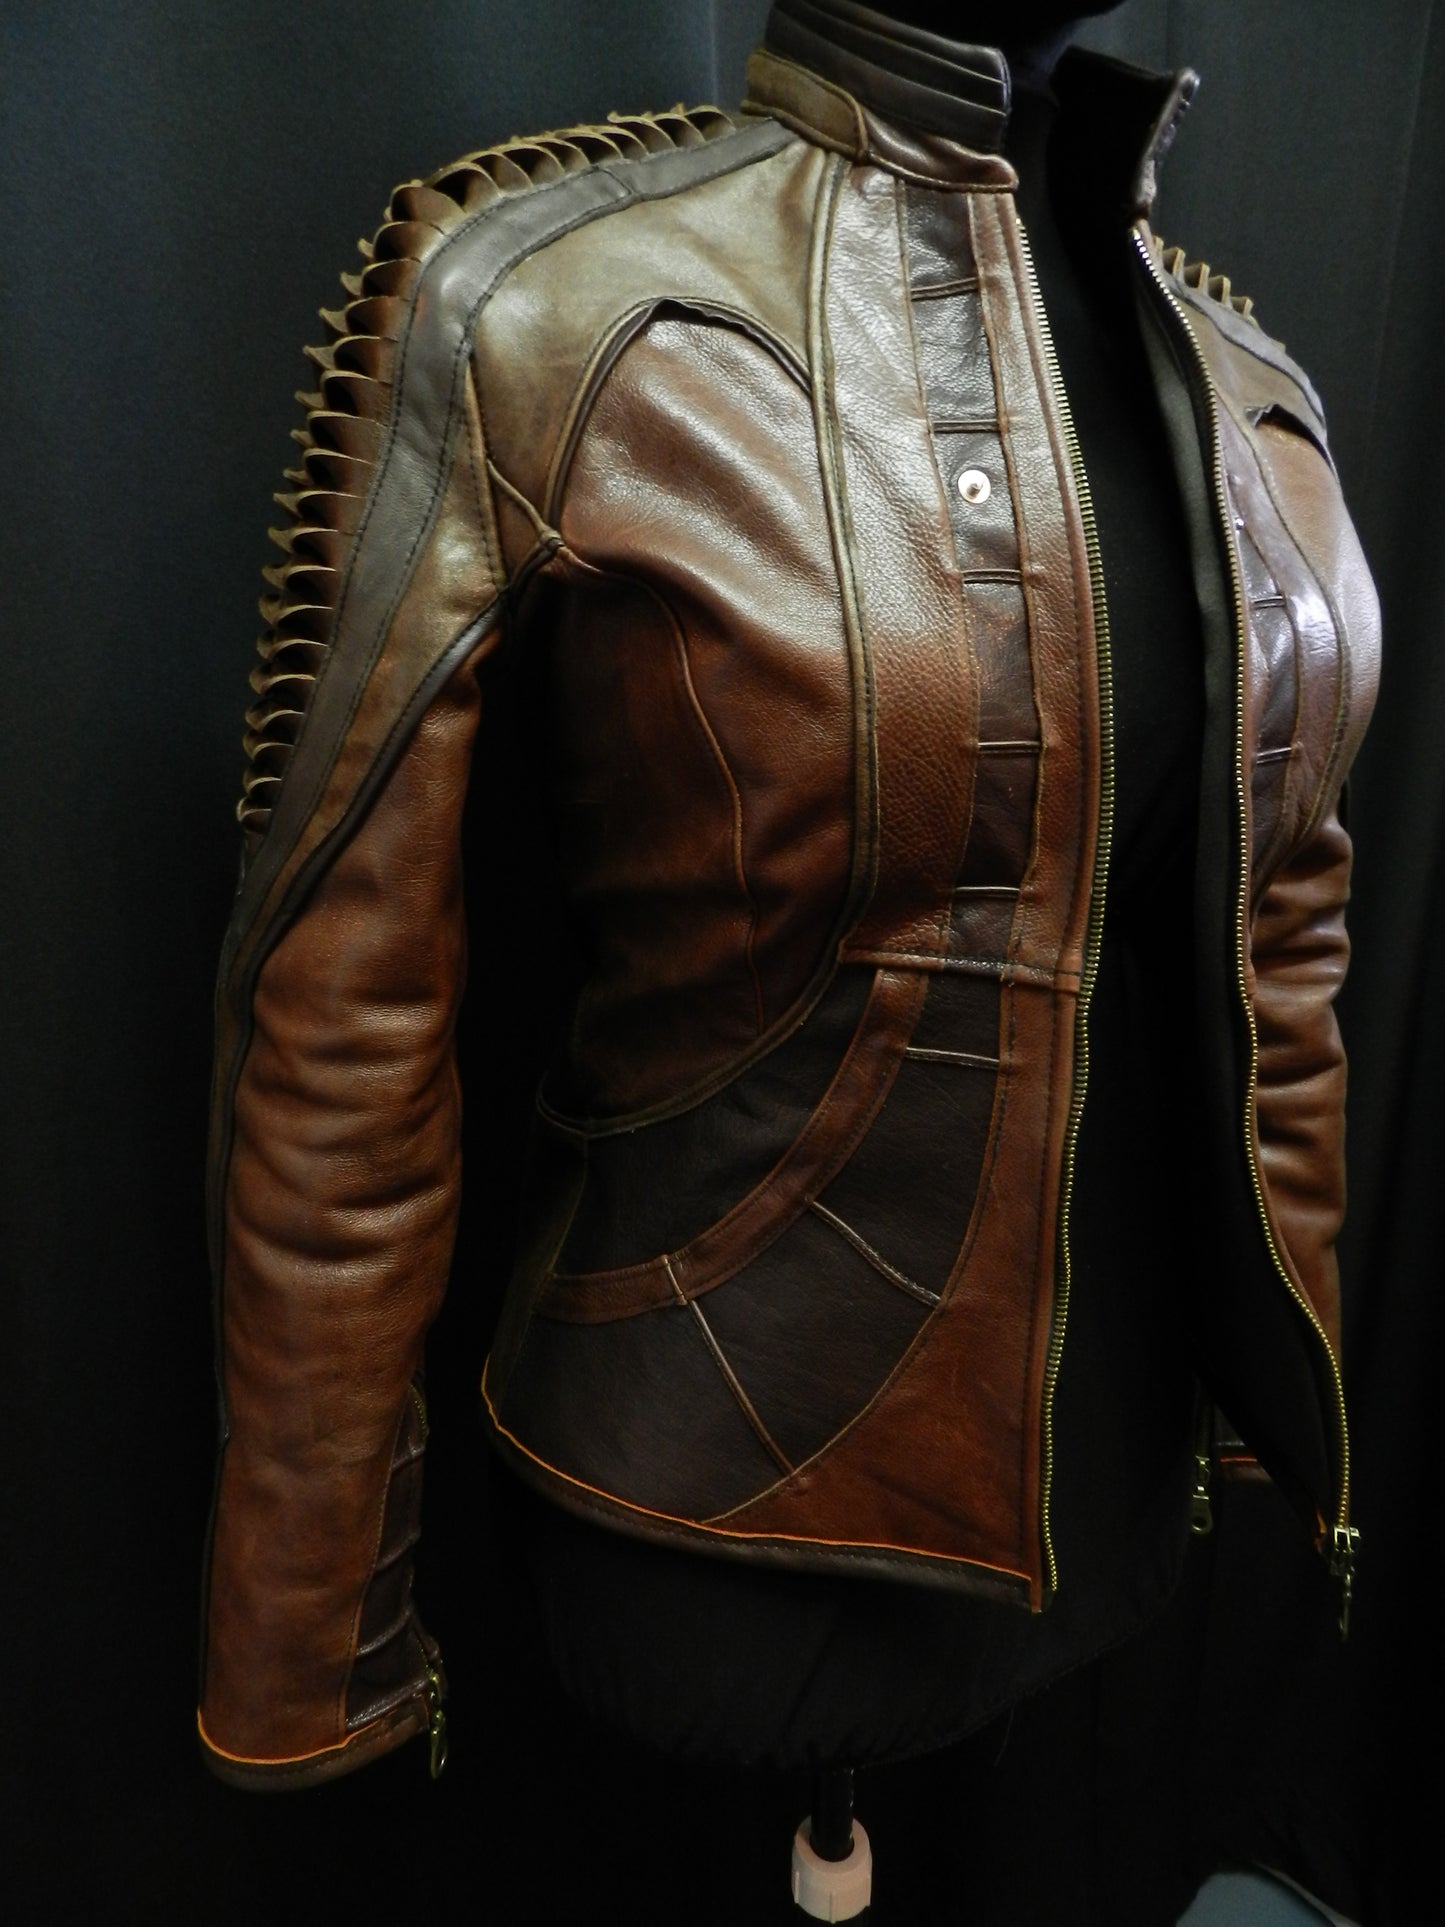 Inspired by Seven of Nine jacket Picard real leather Jacket custom made to your size!